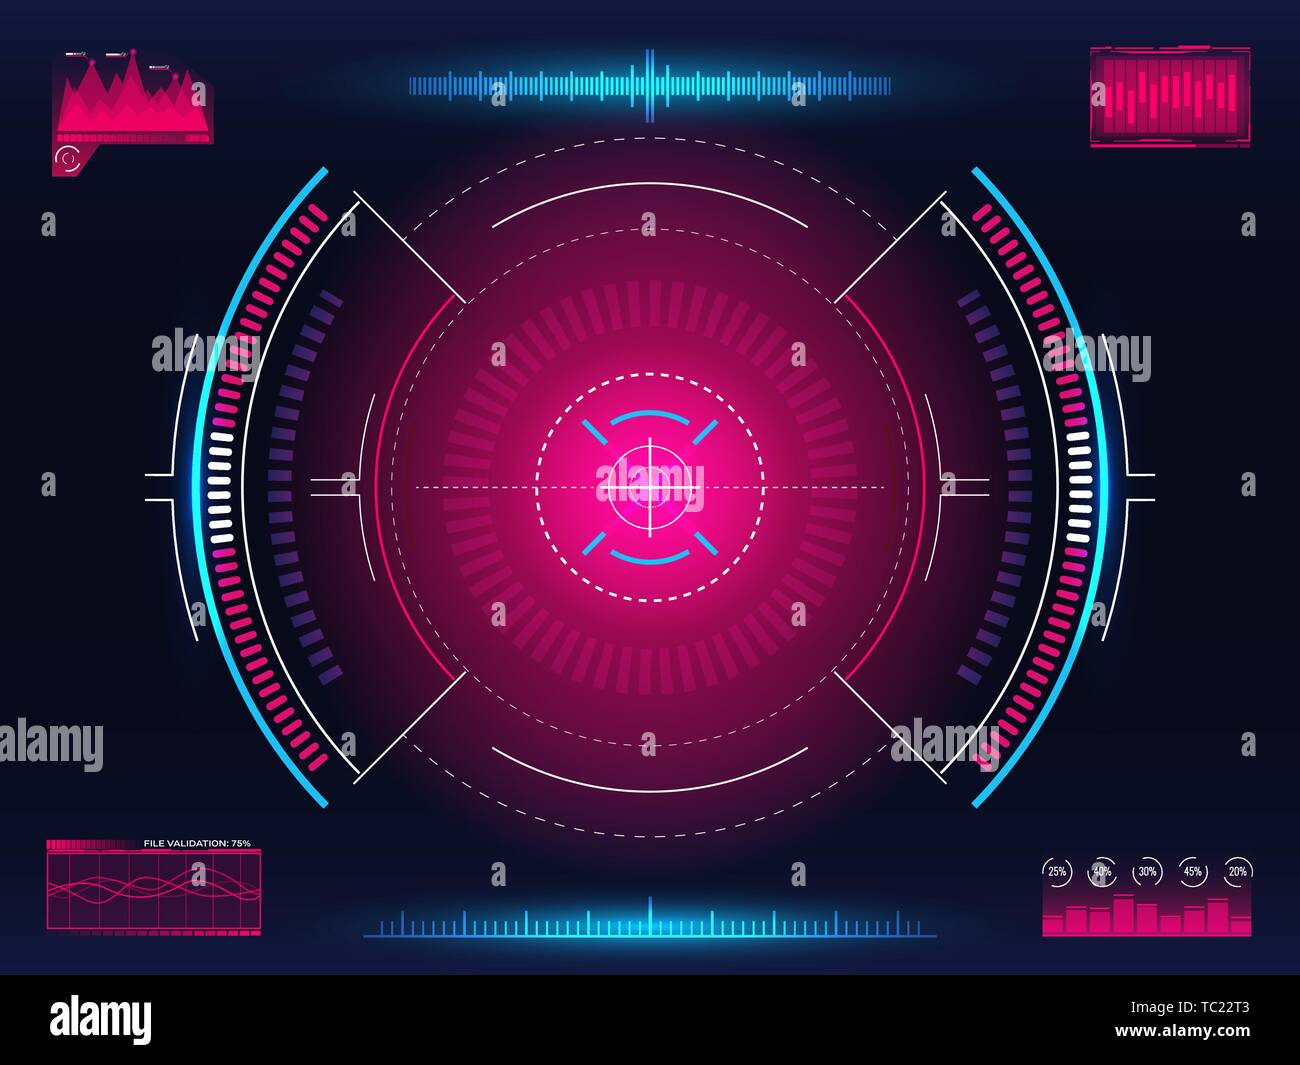 Aim system. Modern aiming concept. Futuristic HUD interface with bright infographic elements. Weapon crosshair template. Game element design Stock Vector